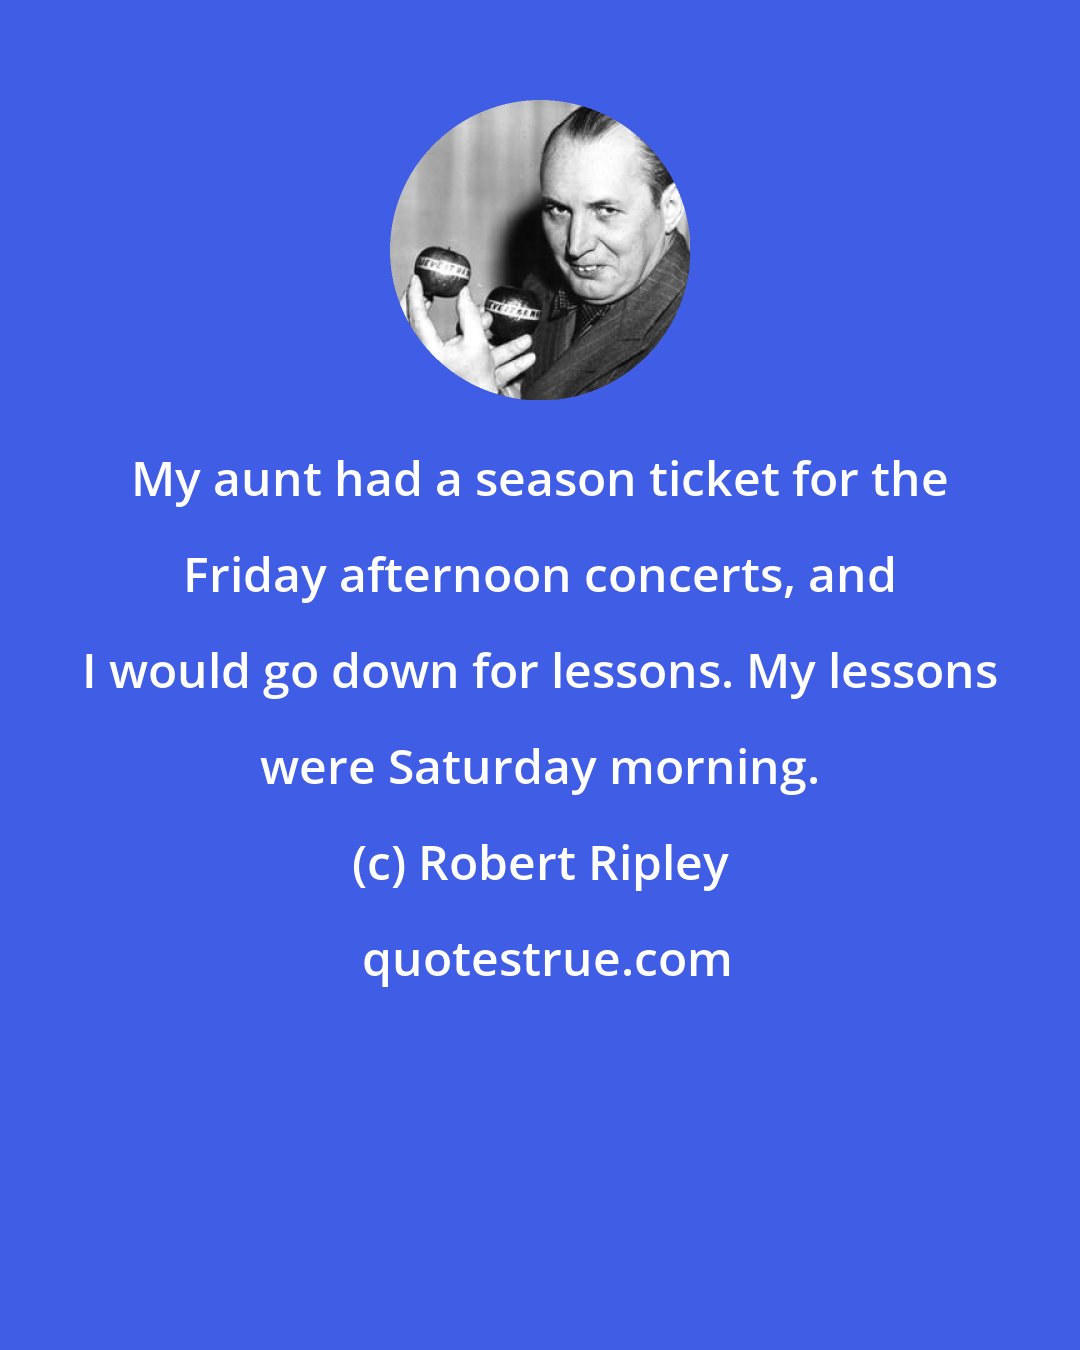 Robert Ripley: My aunt had a season ticket for the Friday afternoon concerts, and I would go down for lessons. My lessons were Saturday morning.